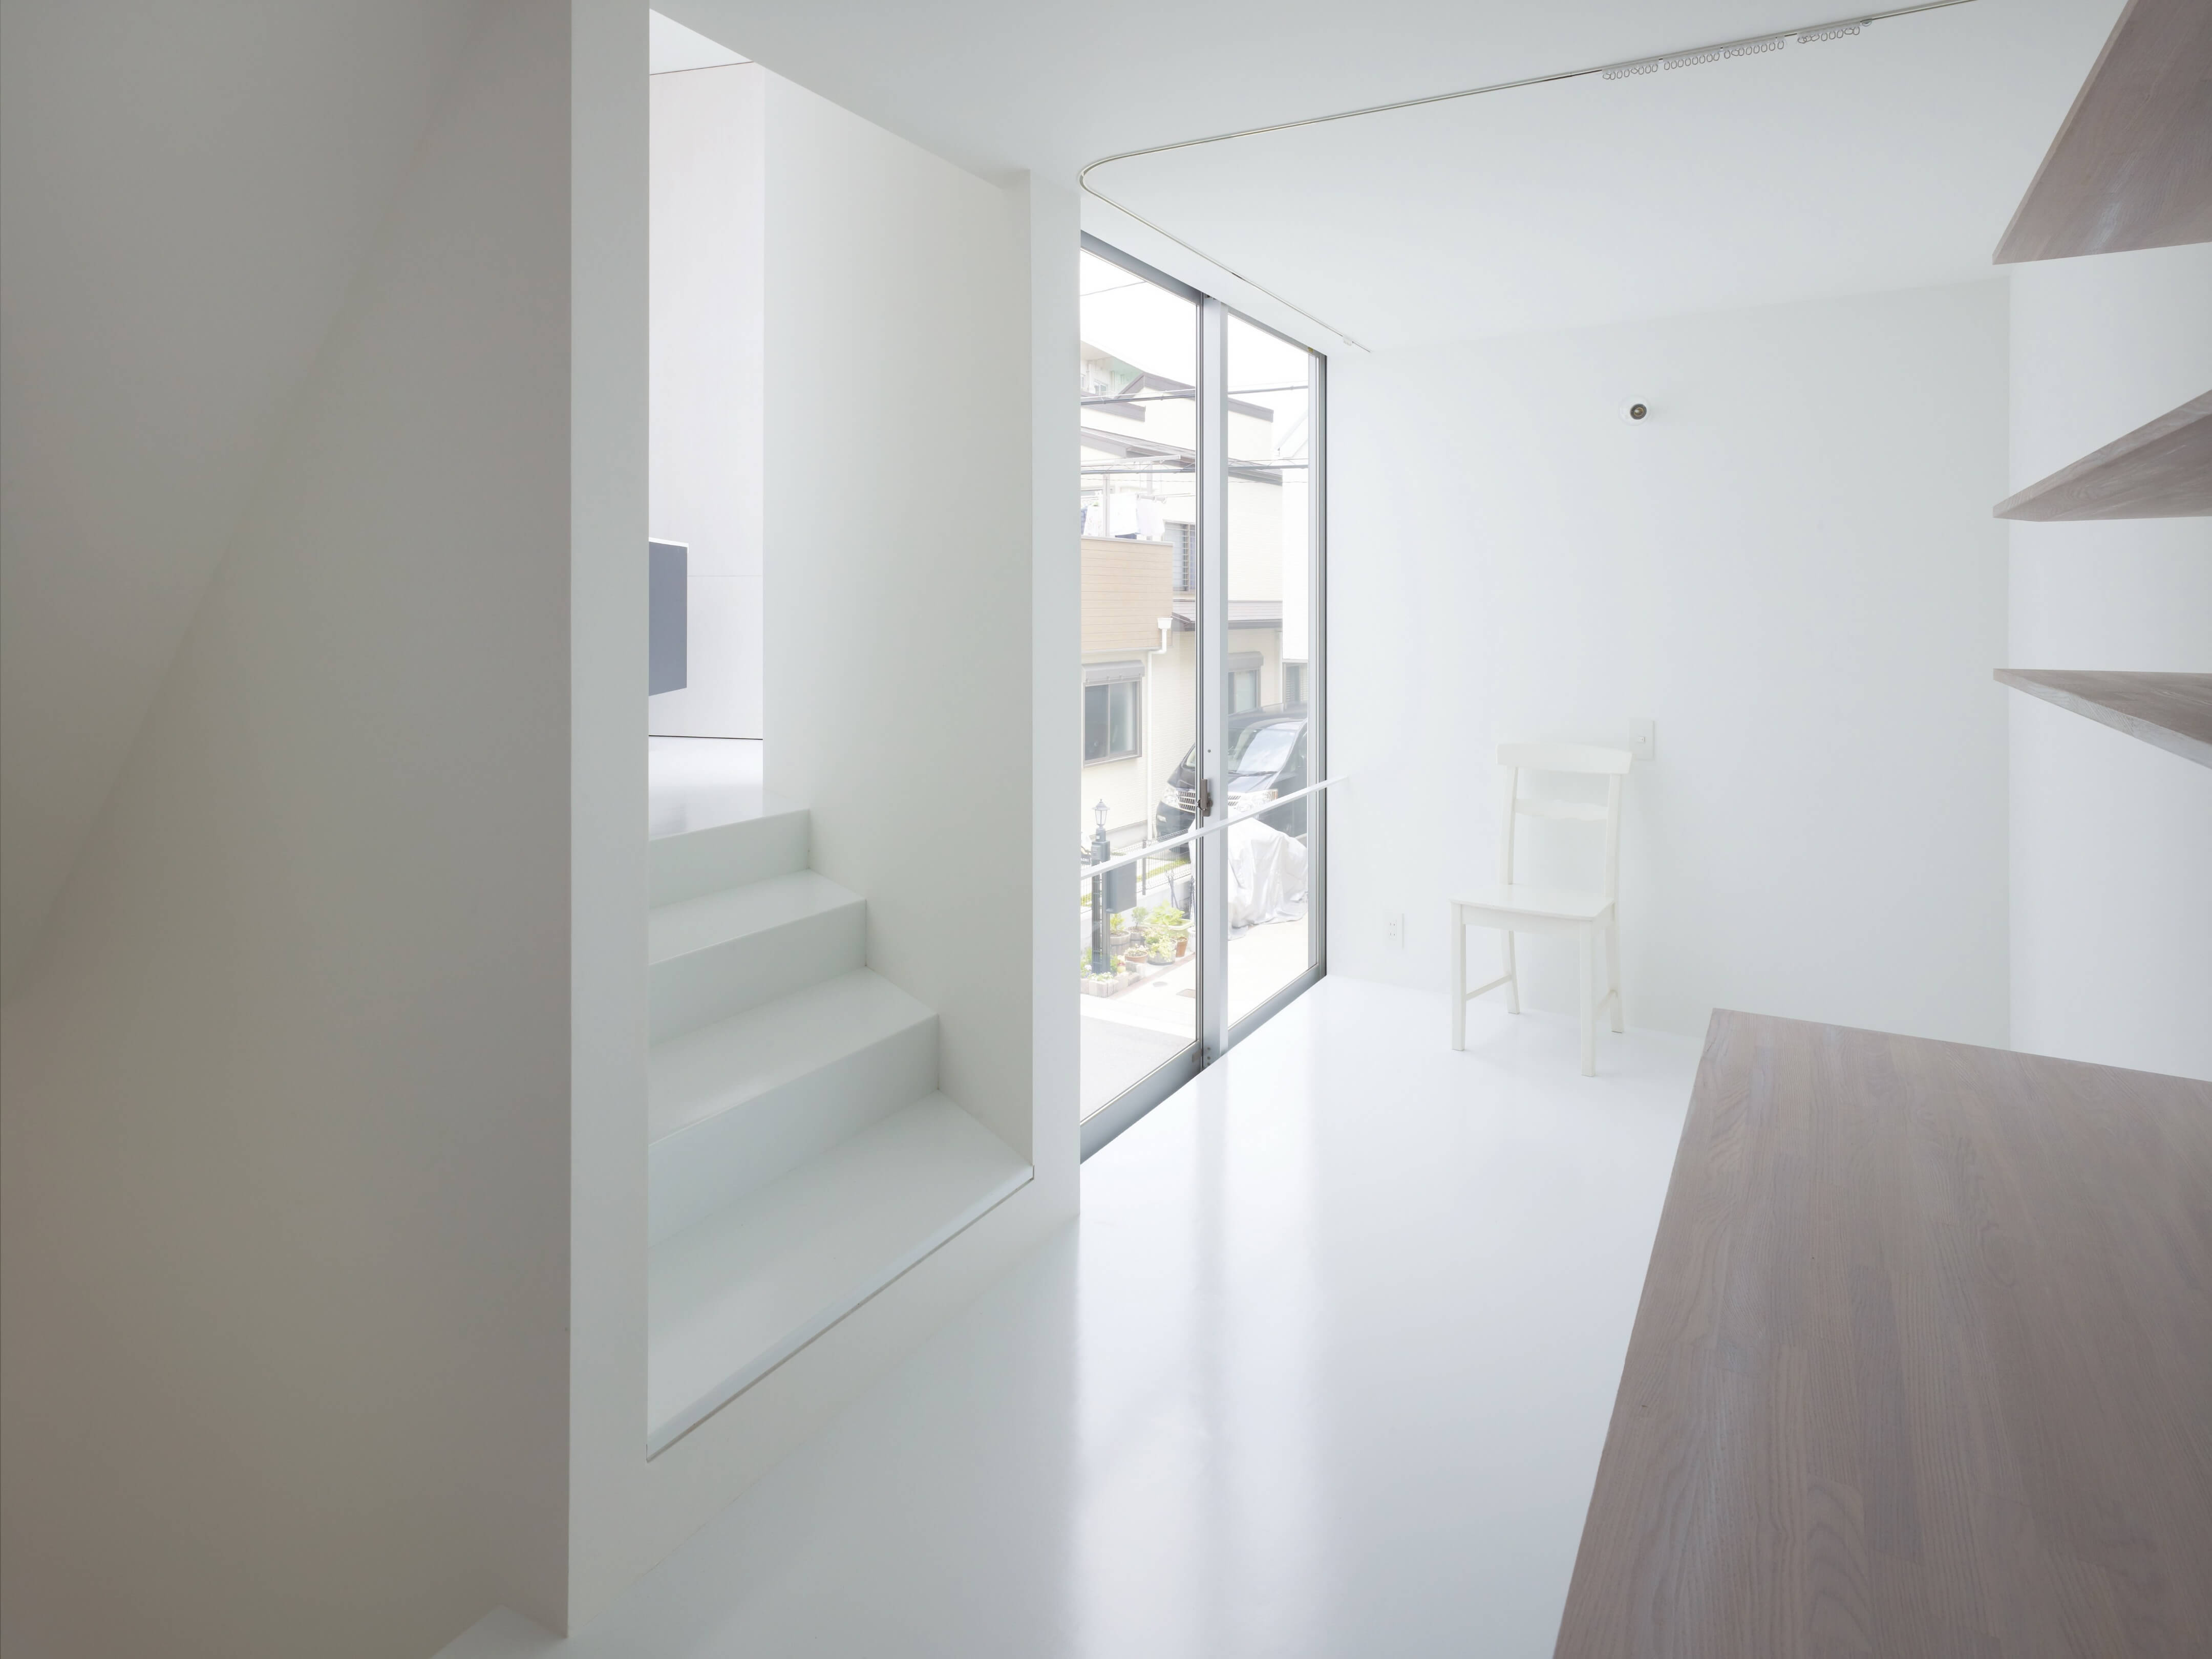 Slice of the City Residence in Hyogo by Alphaville Architects-06